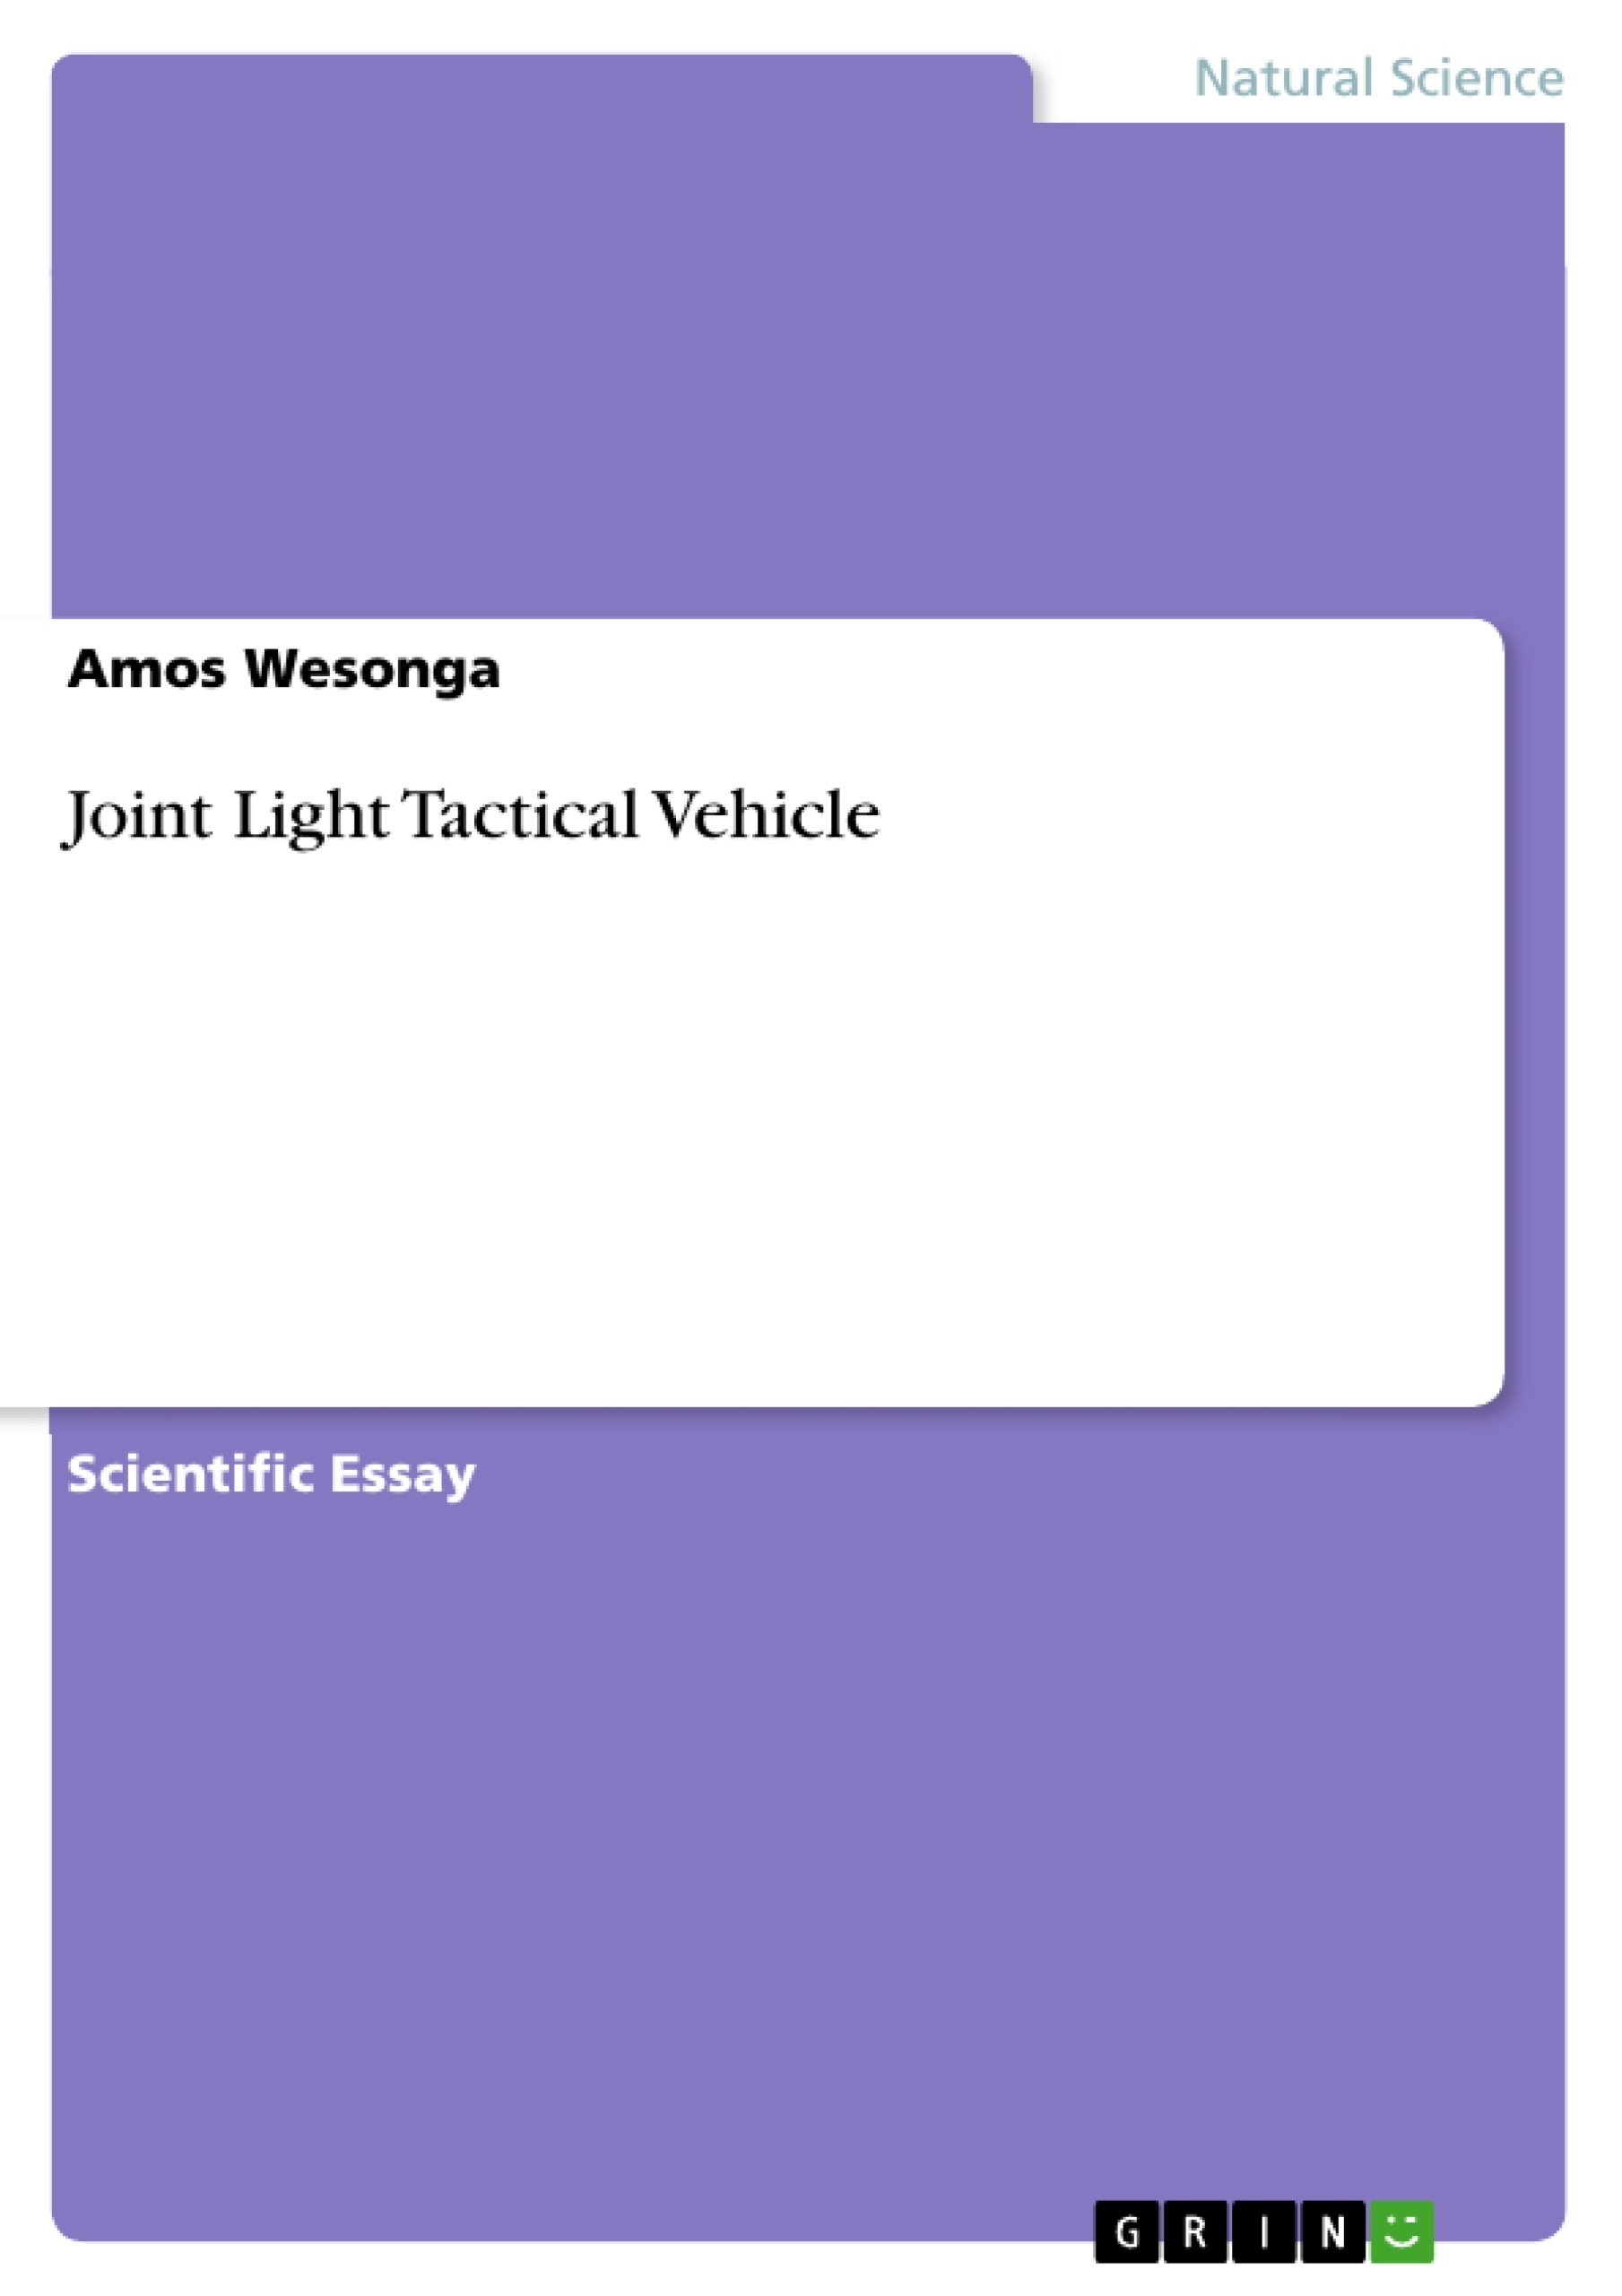 Título: Joint Light Tactical Vehicle